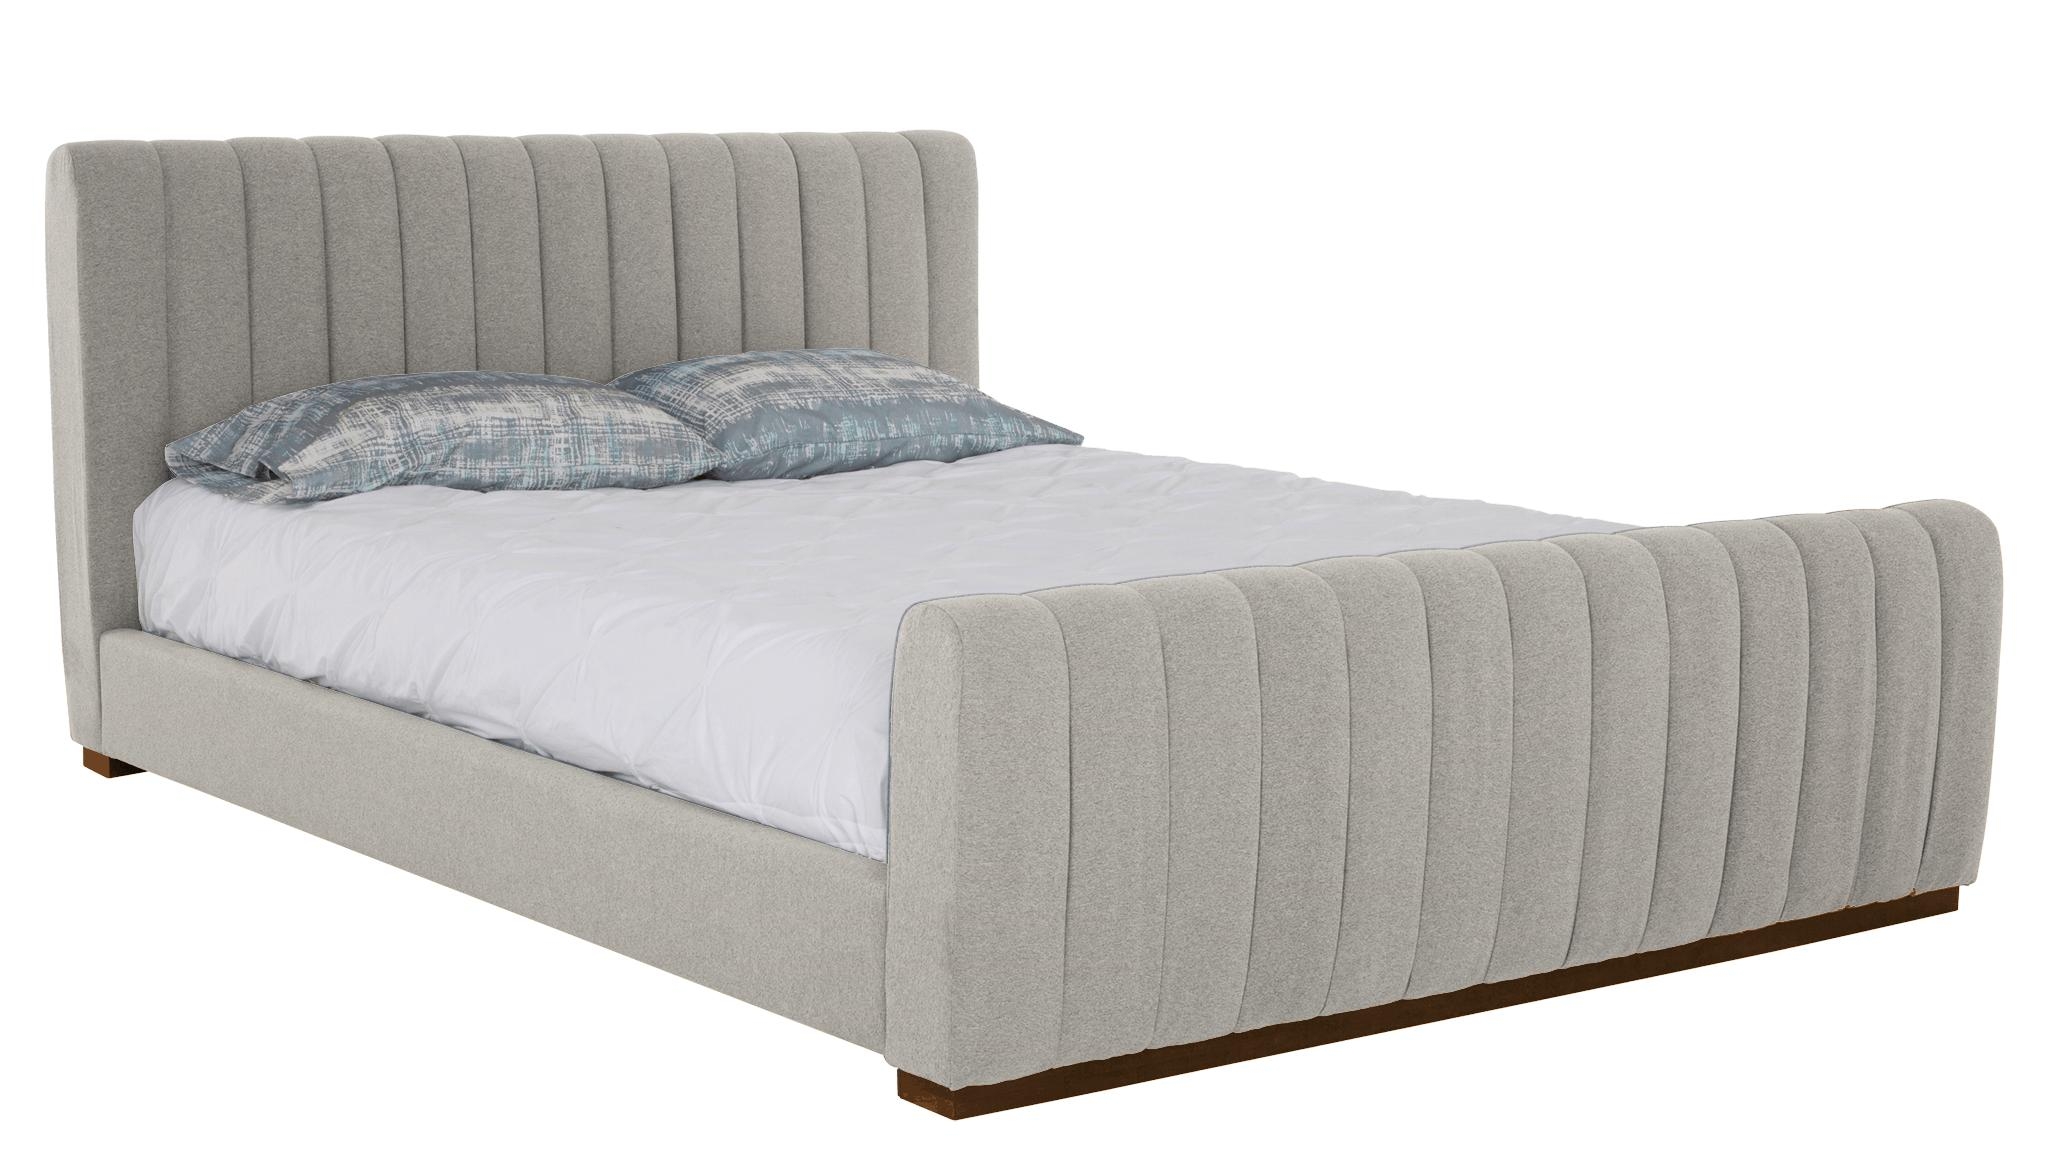 White Camille Mid Century Modern Bed - Bloke Cotton - Mocha - Queen - Image 1